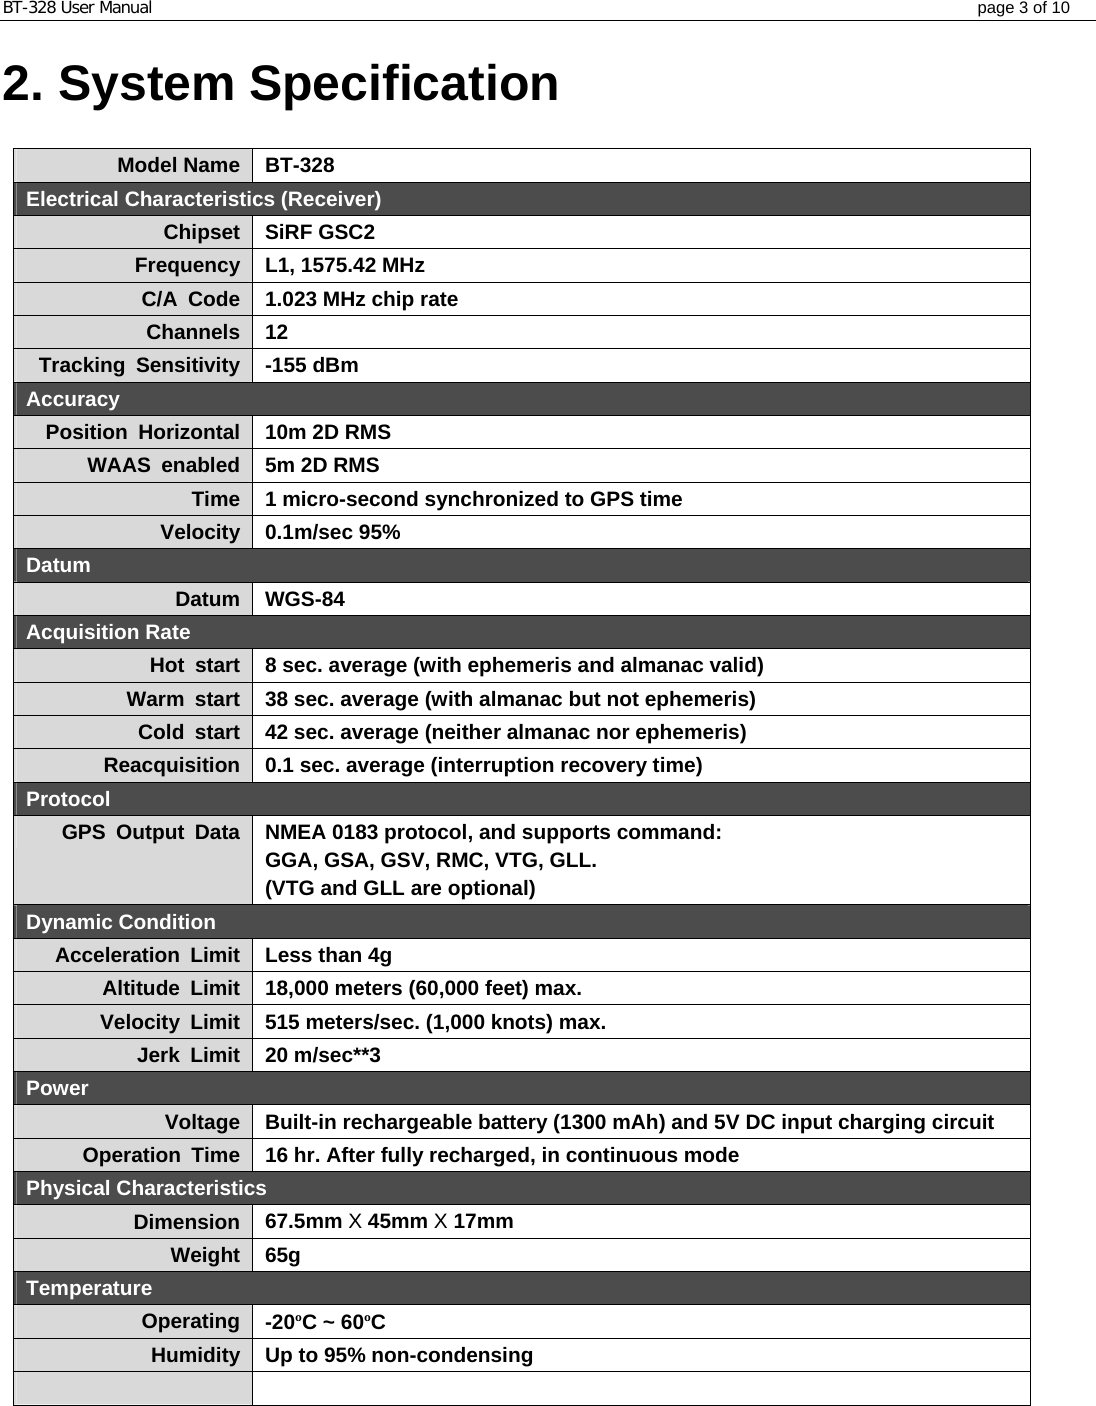 BT-328 User Manual  page 3 of 10 2. System Specification  Model Name  BT-328 Electrical Characteristics (Receiver) Chipset  SiRF GSC2 Frequency  L1, 1575.42 MHz C/A Code  1.023 MHz chip rate Channels  12 Tracking Sensitivity  -155 dBm Accuracy Position Horizontal  10m 2D RMS WAAS enabled  5m 2D RMS Time  1 micro-second synchronized to GPS time Velocity  0.1m/sec 95% Datum Datum  WGS-84 Acquisition Rate Hot start  8 sec. average (with ephemeris and almanac valid) Warm start  38 sec. average (with almanac but not ephemeris) Cold start  42 sec. average (neither almanac nor ephemeris) Reacquisition  0.1 sec. average (interruption recovery time) Protocol GPS Output Data  NMEA 0183 protocol, and supports command: GGA, GSA, GSV, RMC, VTG, GLL. (VTG and GLL are optional) Dynamic Condition Acceleration Limit  Less than 4g Altitude Limit  18,000 meters (60,000 feet) max. Velocity Limit  515 meters/sec. (1,000 knots) max. Jerk Limit  20 m/sec**3 Power Voltage  Built-in rechargeable battery (1300 mAh) and 5V DC input charging circuit Operation Time  16 hr. After fully recharged, in continuous mode Physical Characteristics Dimension  67.5mm X 45mm X 17mm Weight  65g Temperature Operating  -20ºC ~ 60ºC Humidity  Up to 95% non-condensing      